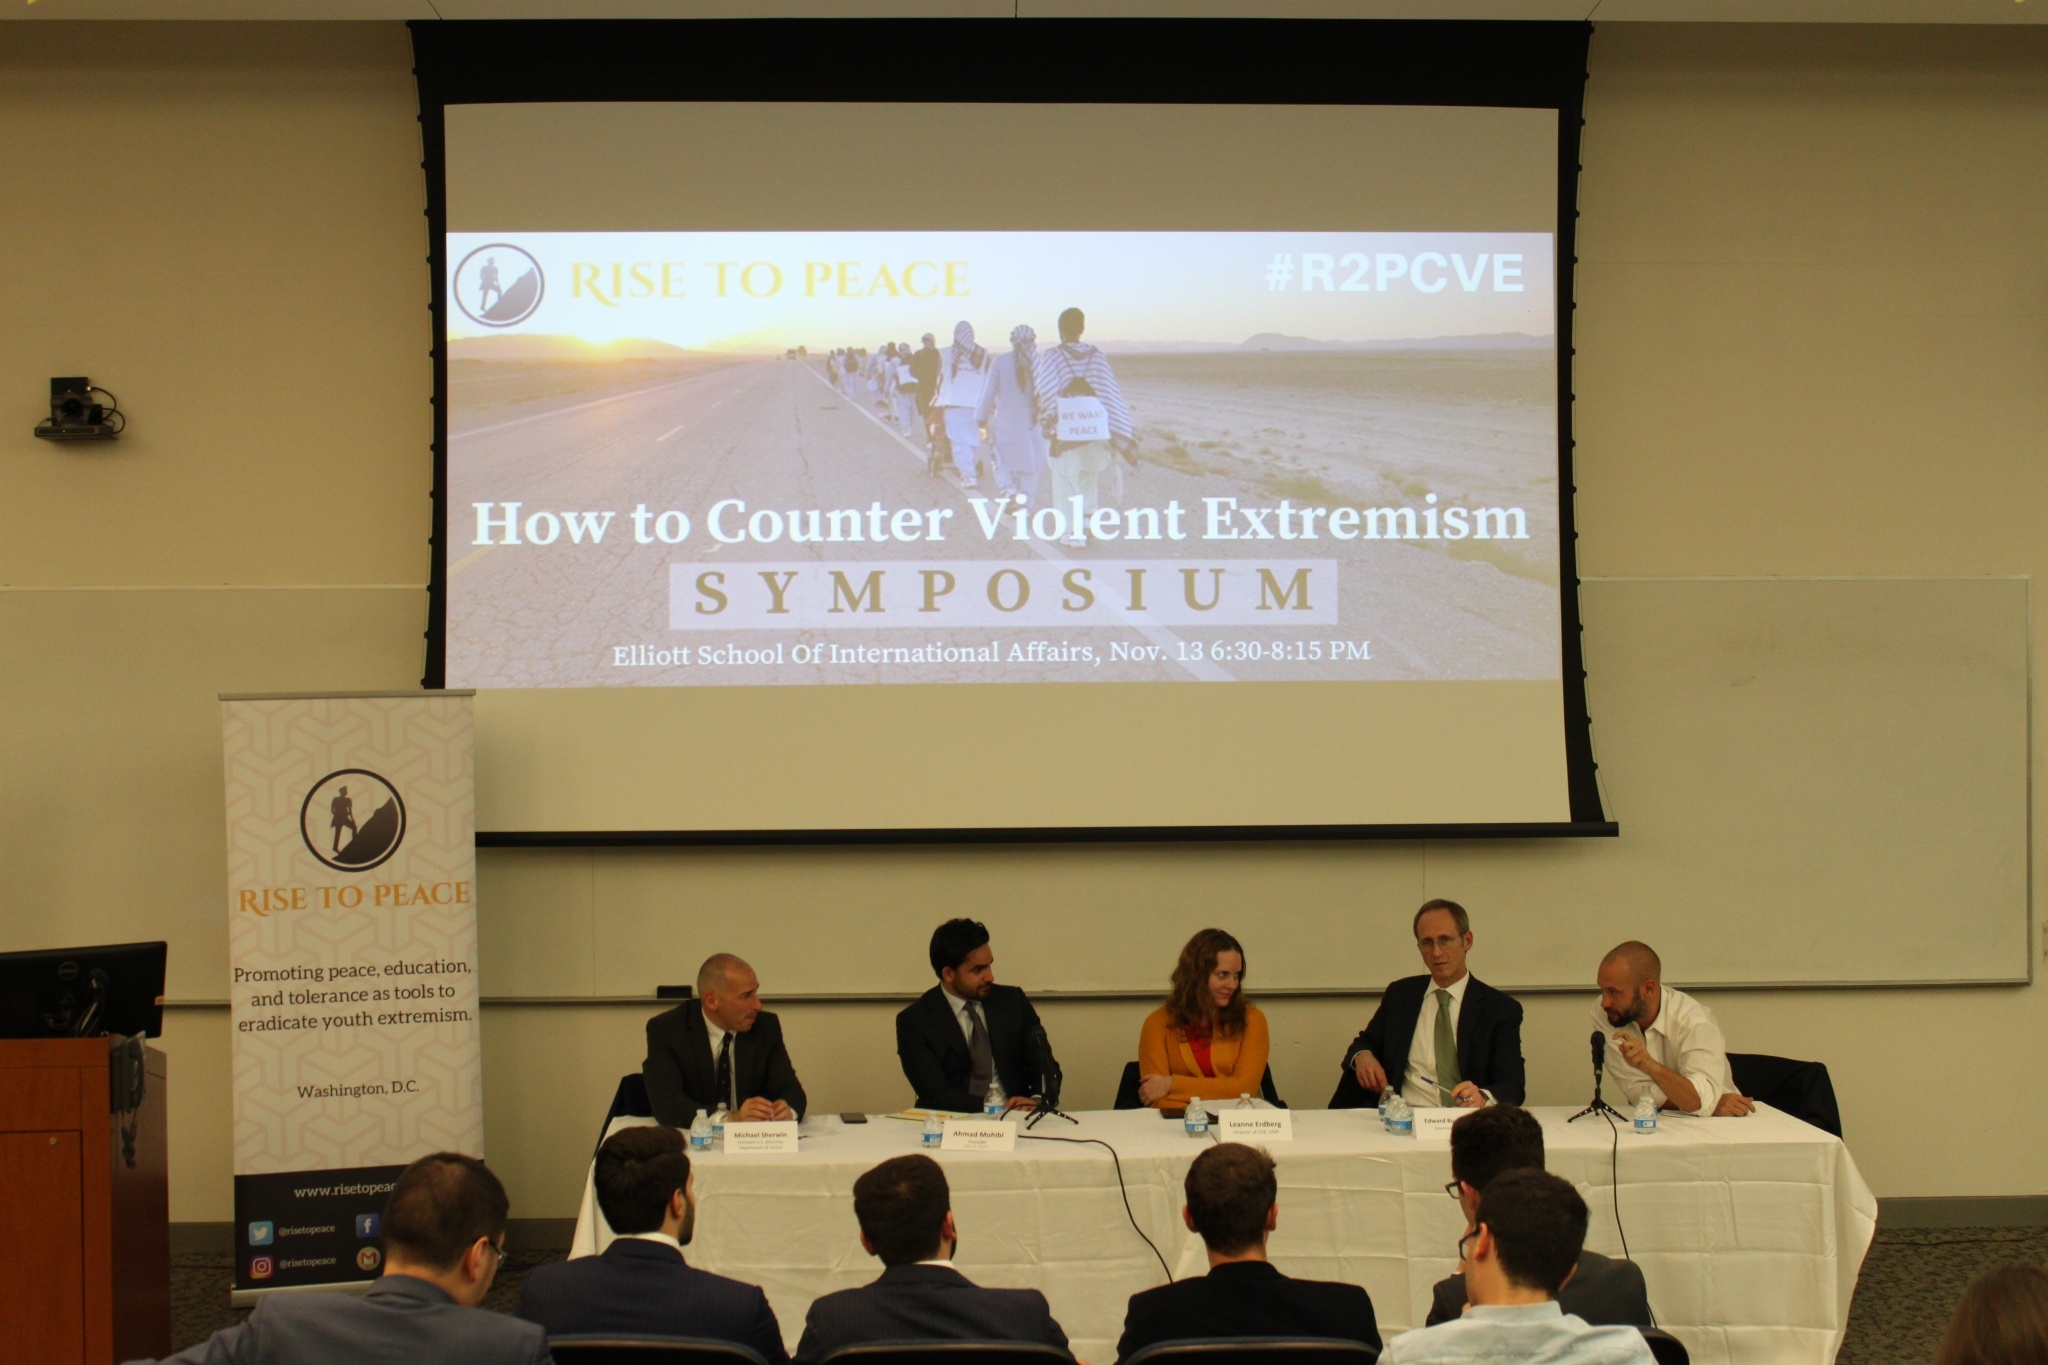 IMG 0630 - Defining the Problem and Reaching a Solution: A Reflection on How to Counter Violent Extremism